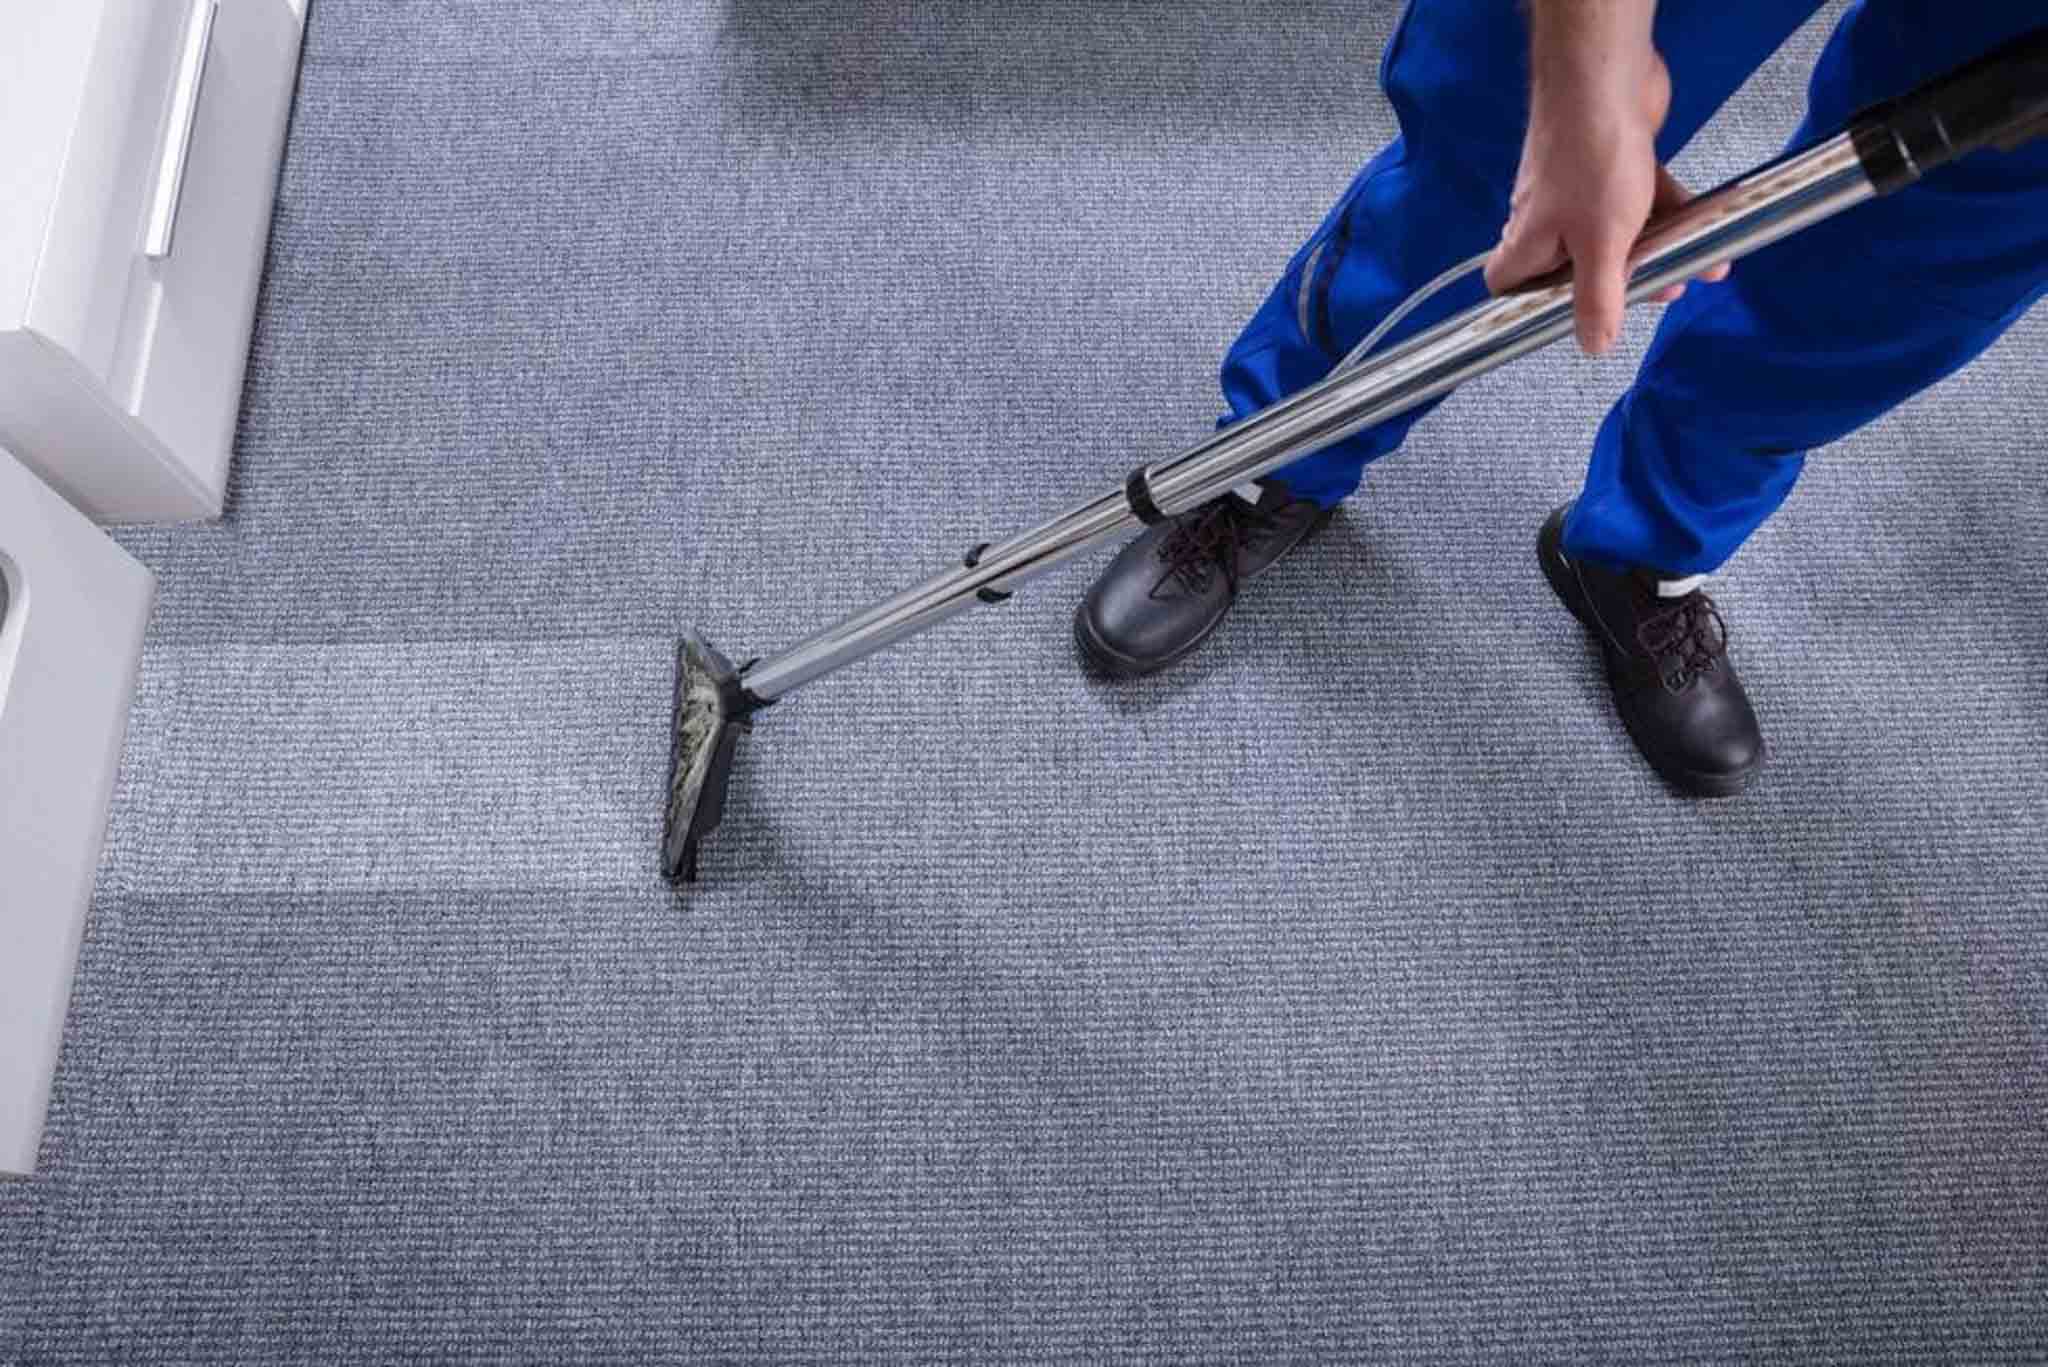 How-To-Remove-Wet-Carpet-Smell-980x654